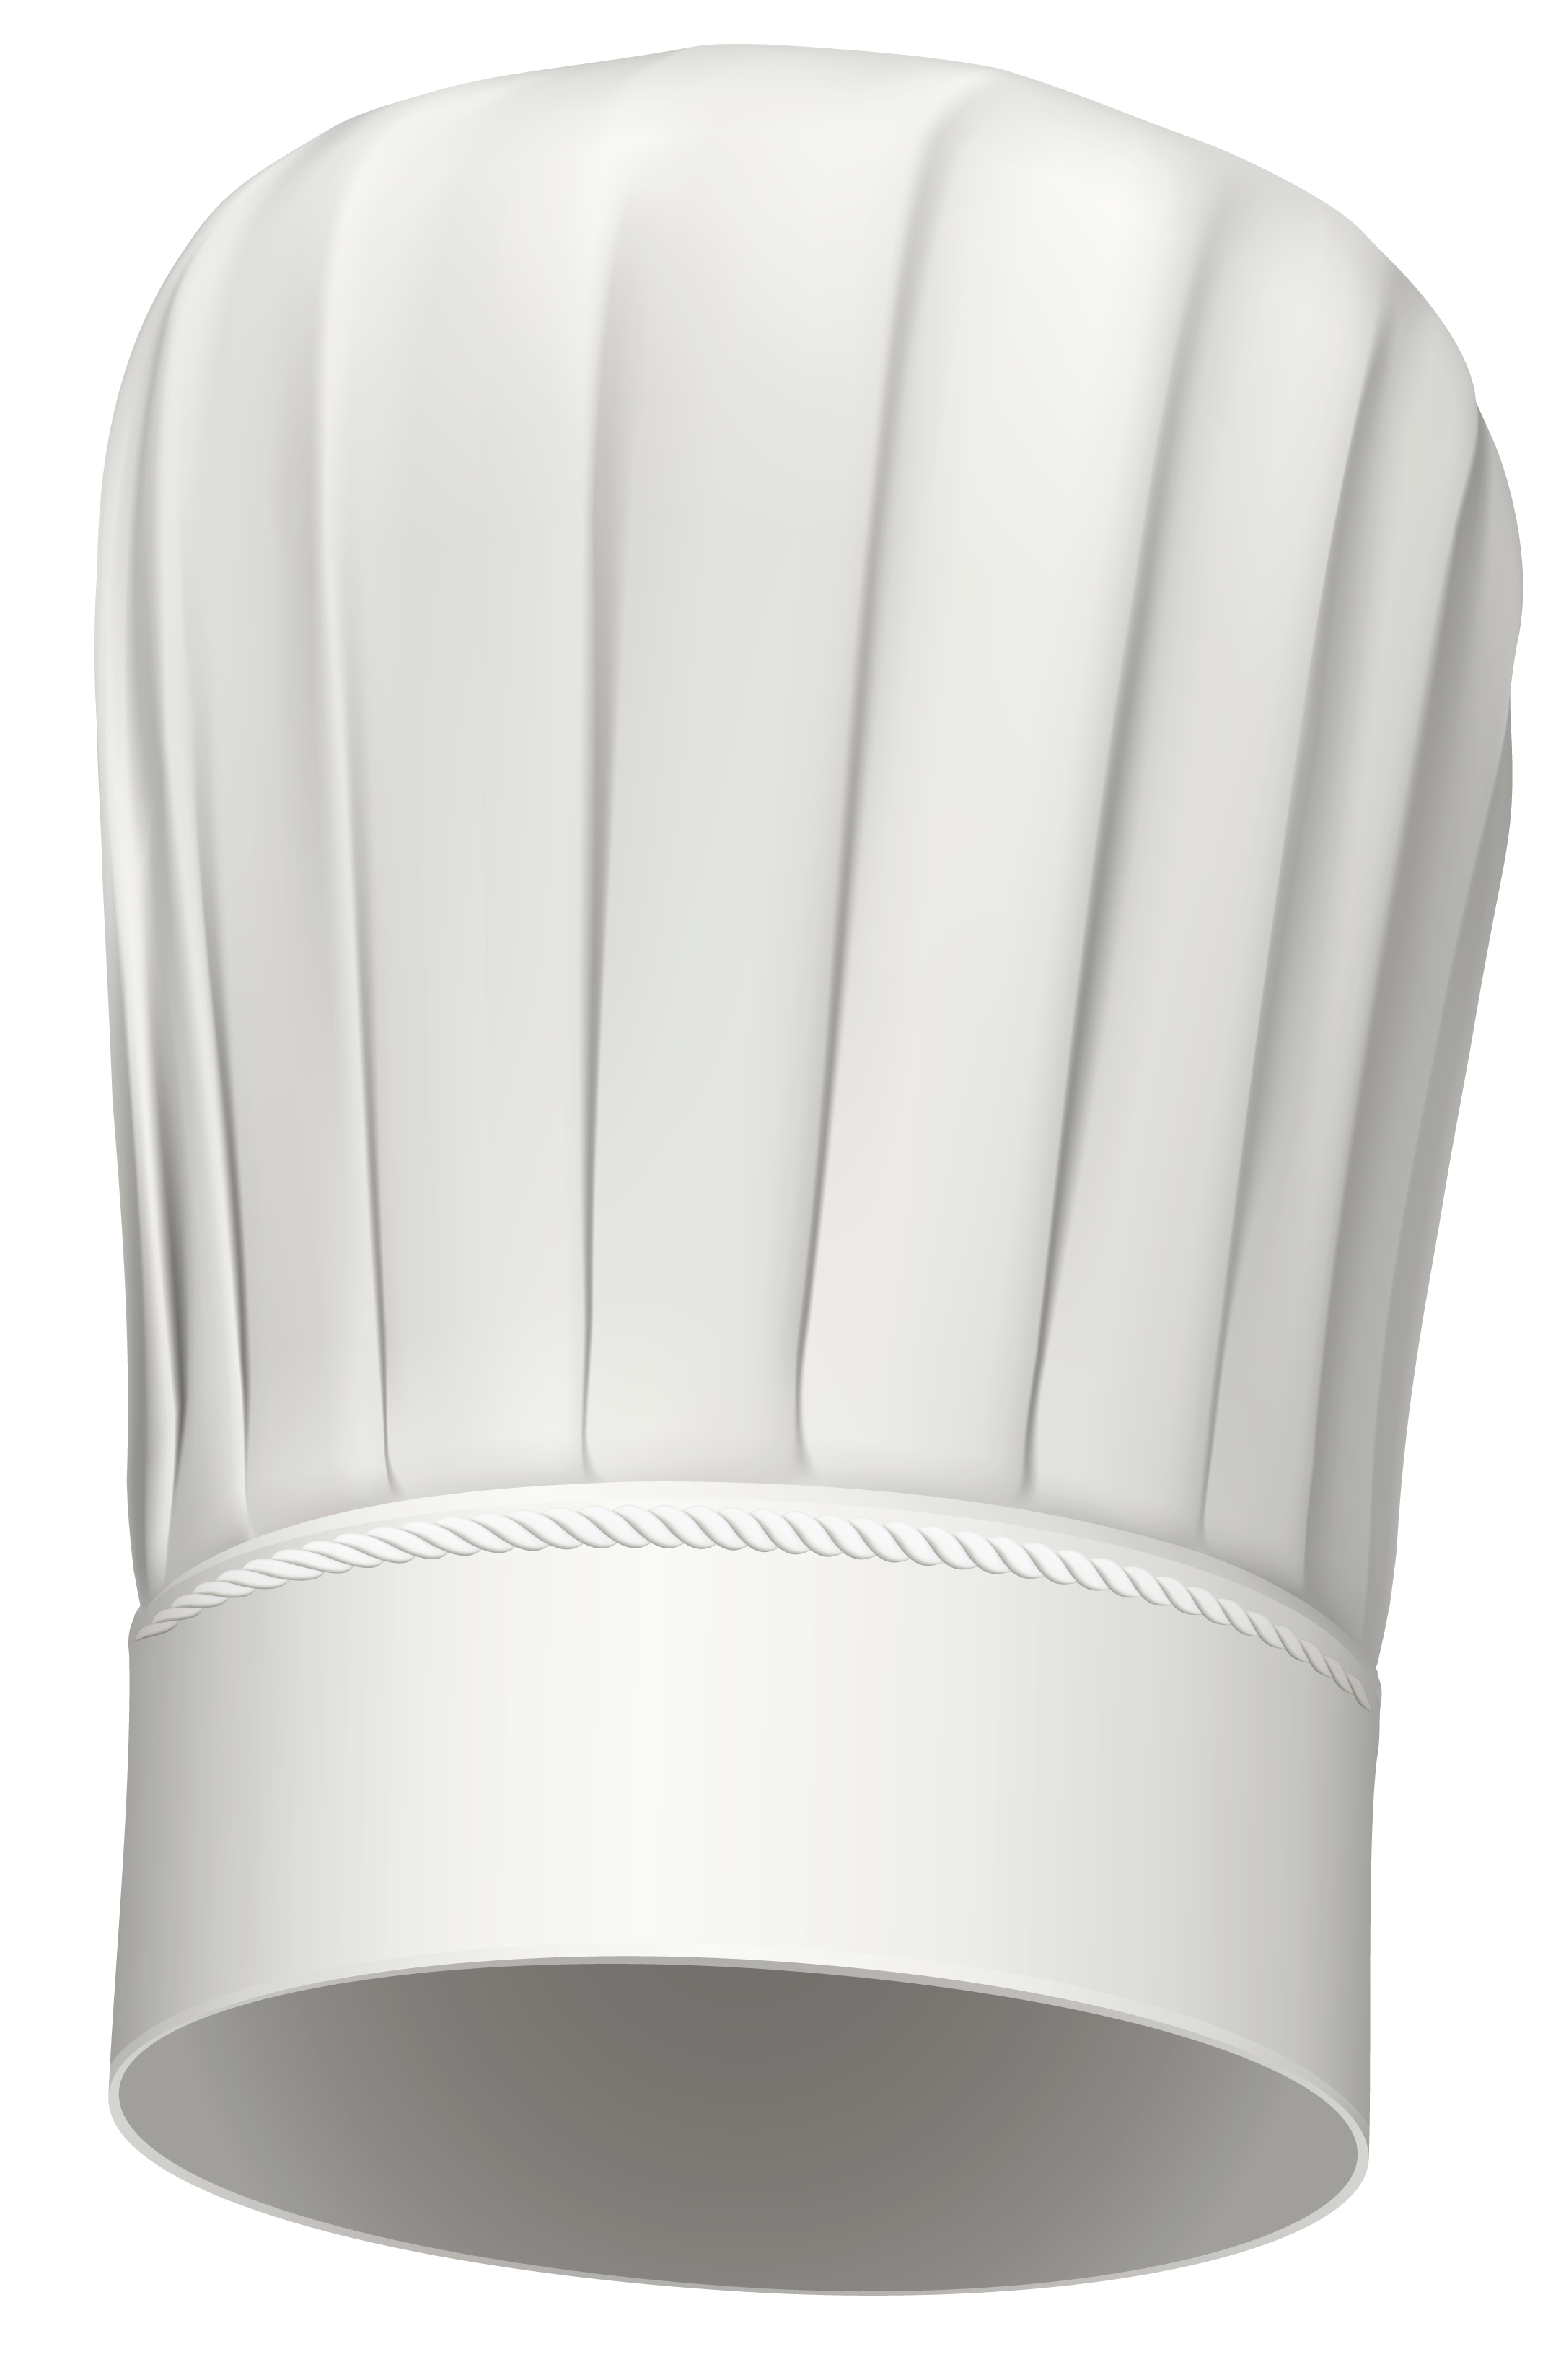 Chef hat clipart 2